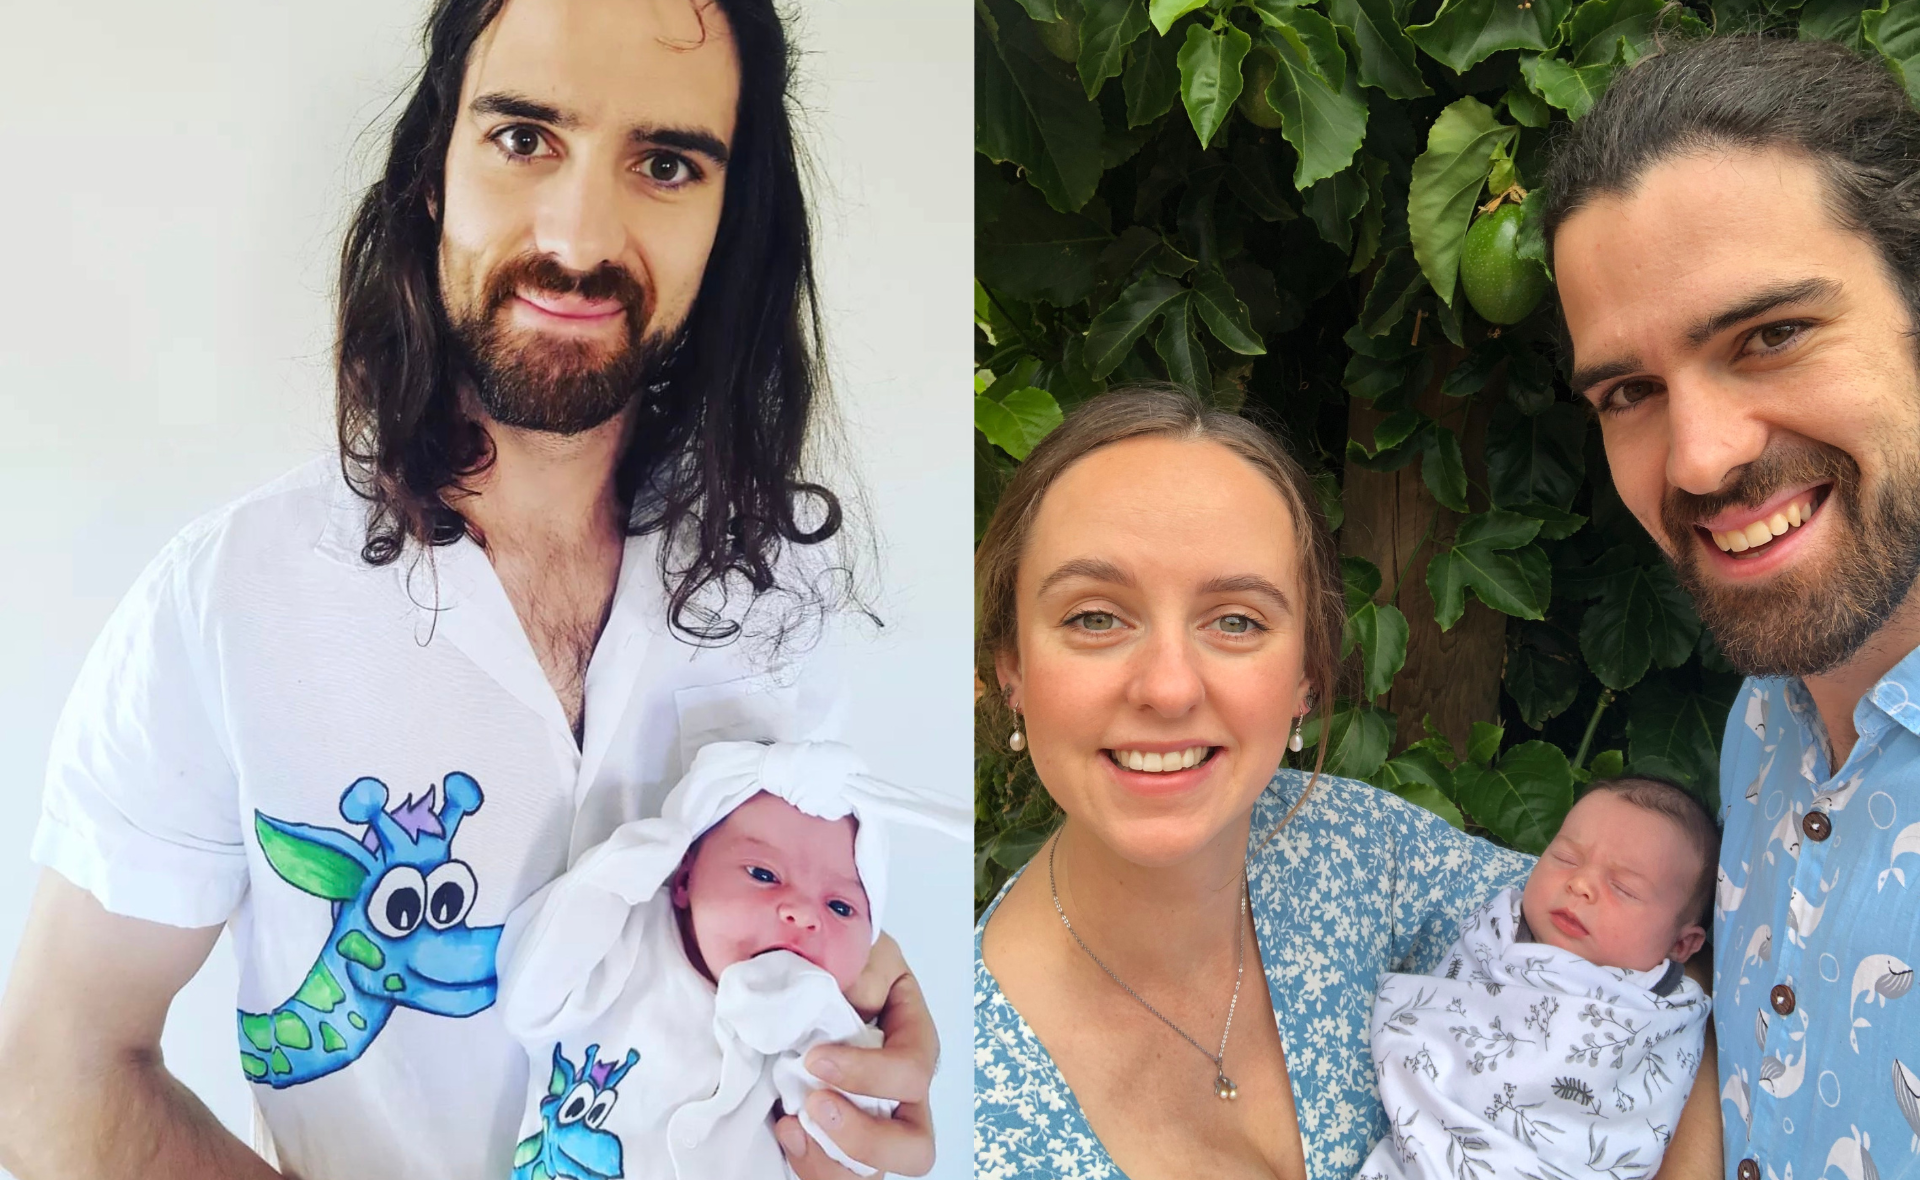 LEGO Masters Australia winner Owen and his wife Arianah have welcomed their baby girl